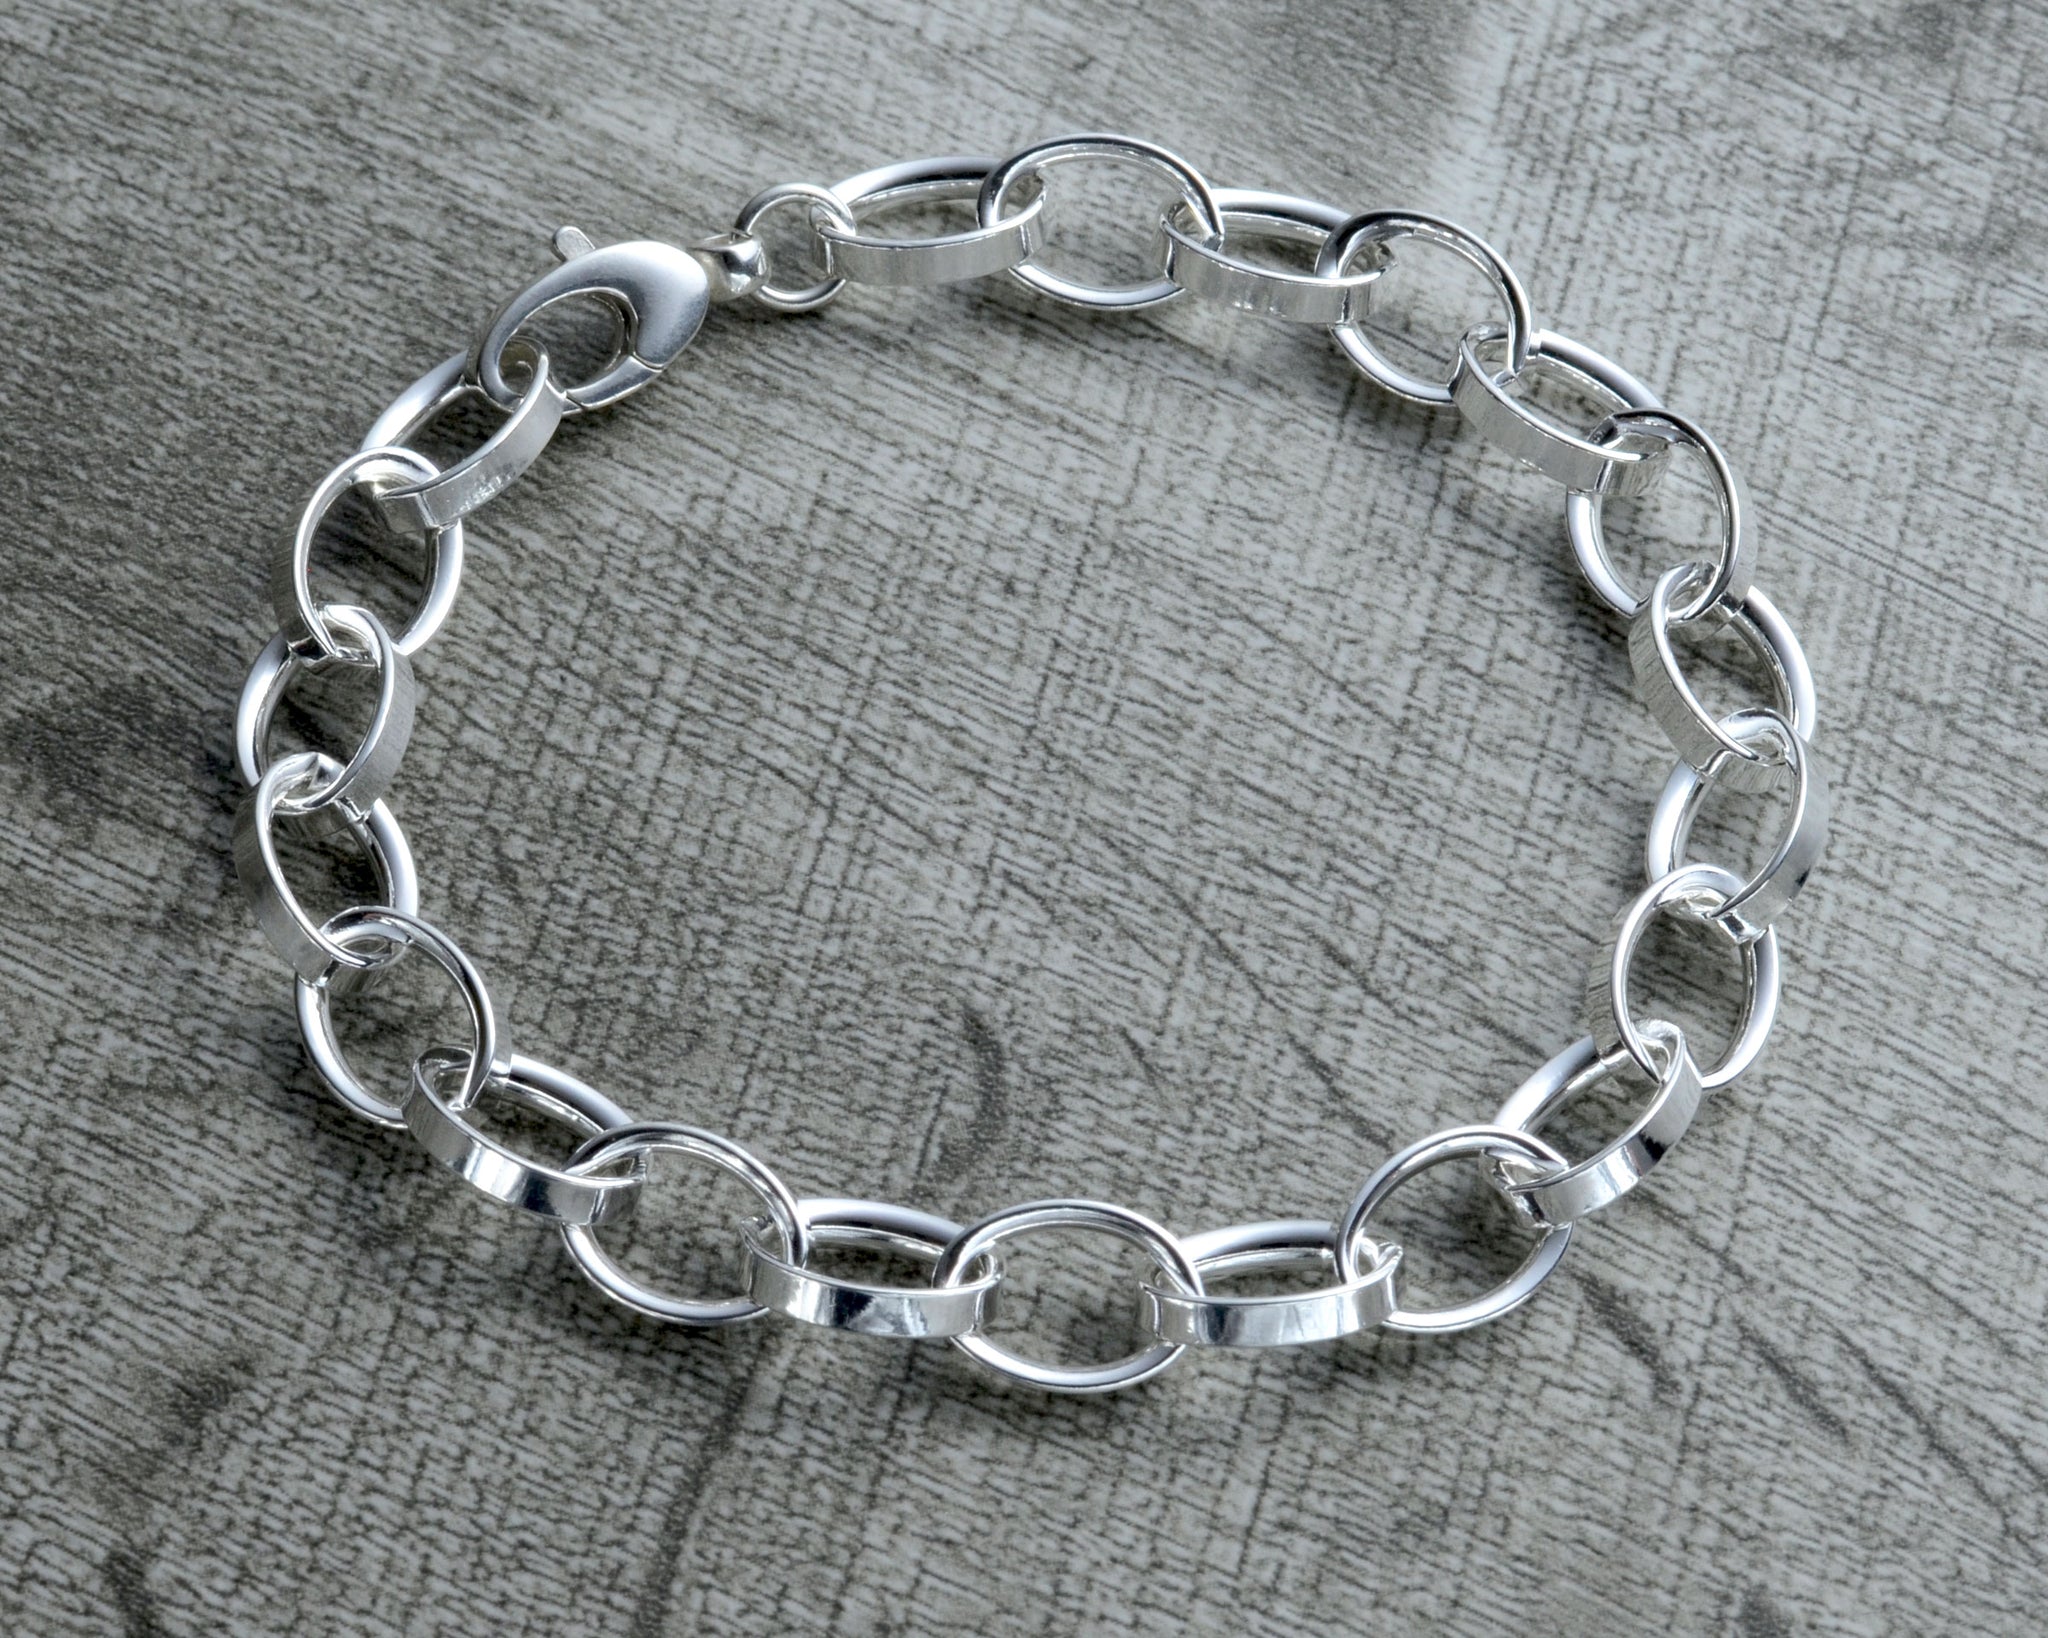 Buy P S jewellers 925 sterling silver bracelet for men(BR026) at Amazon.in